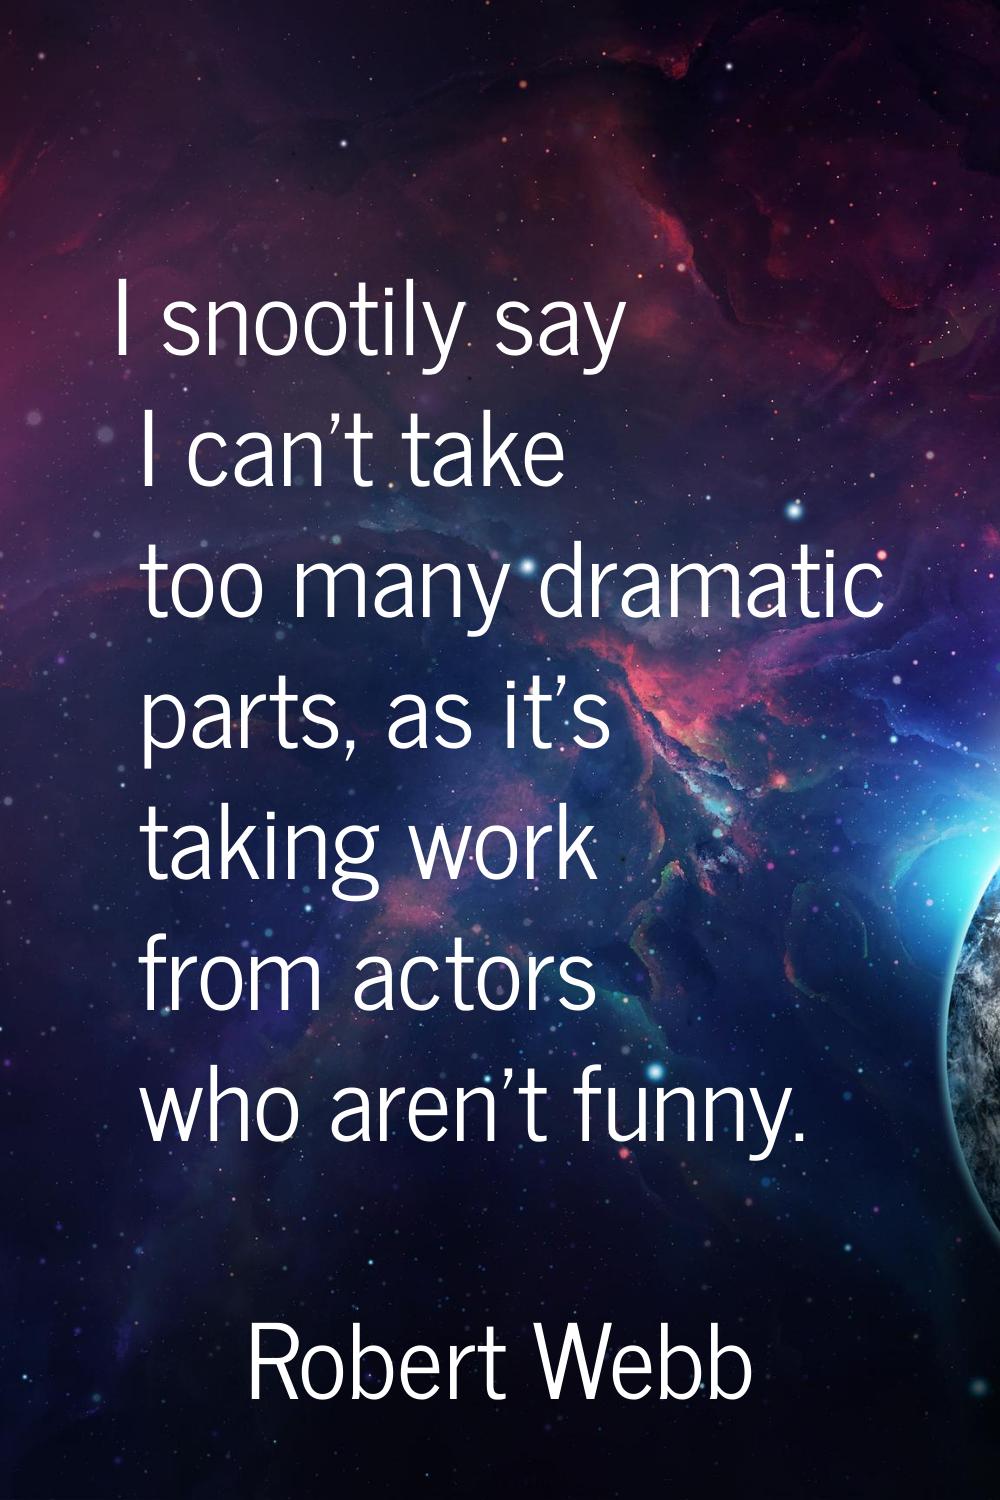 I snootily say I can't take too many dramatic parts, as it's taking work from actors who aren't fun